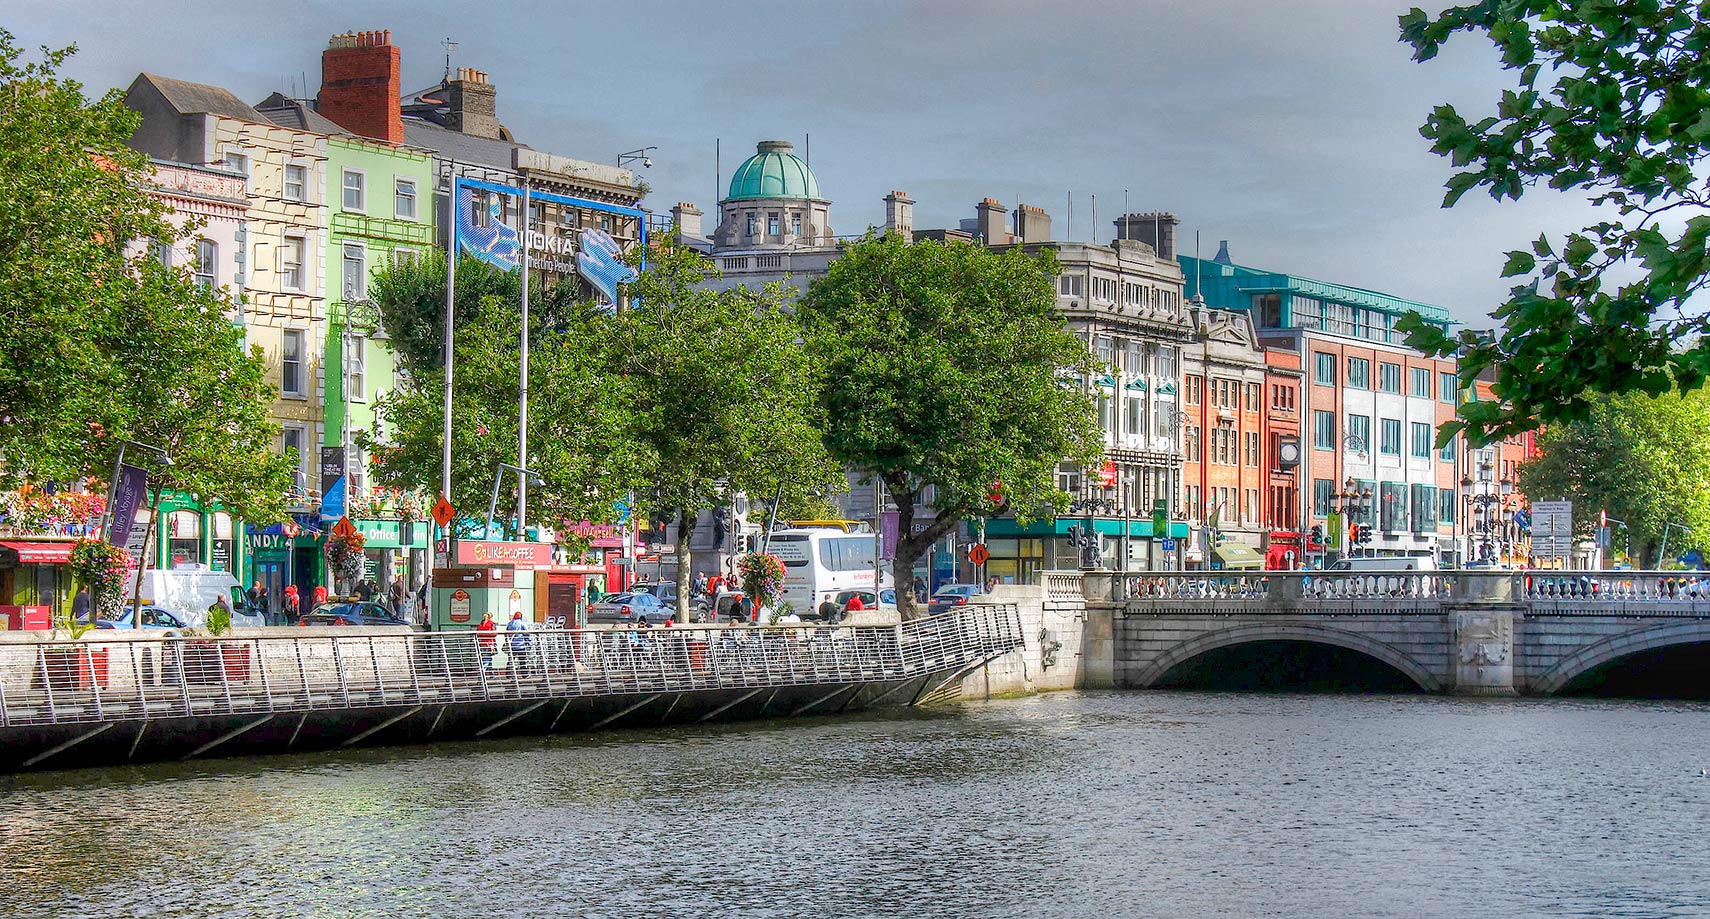 Bachelors Walk with O'Connell Bridge over River Liffey in Dublin, Ireland